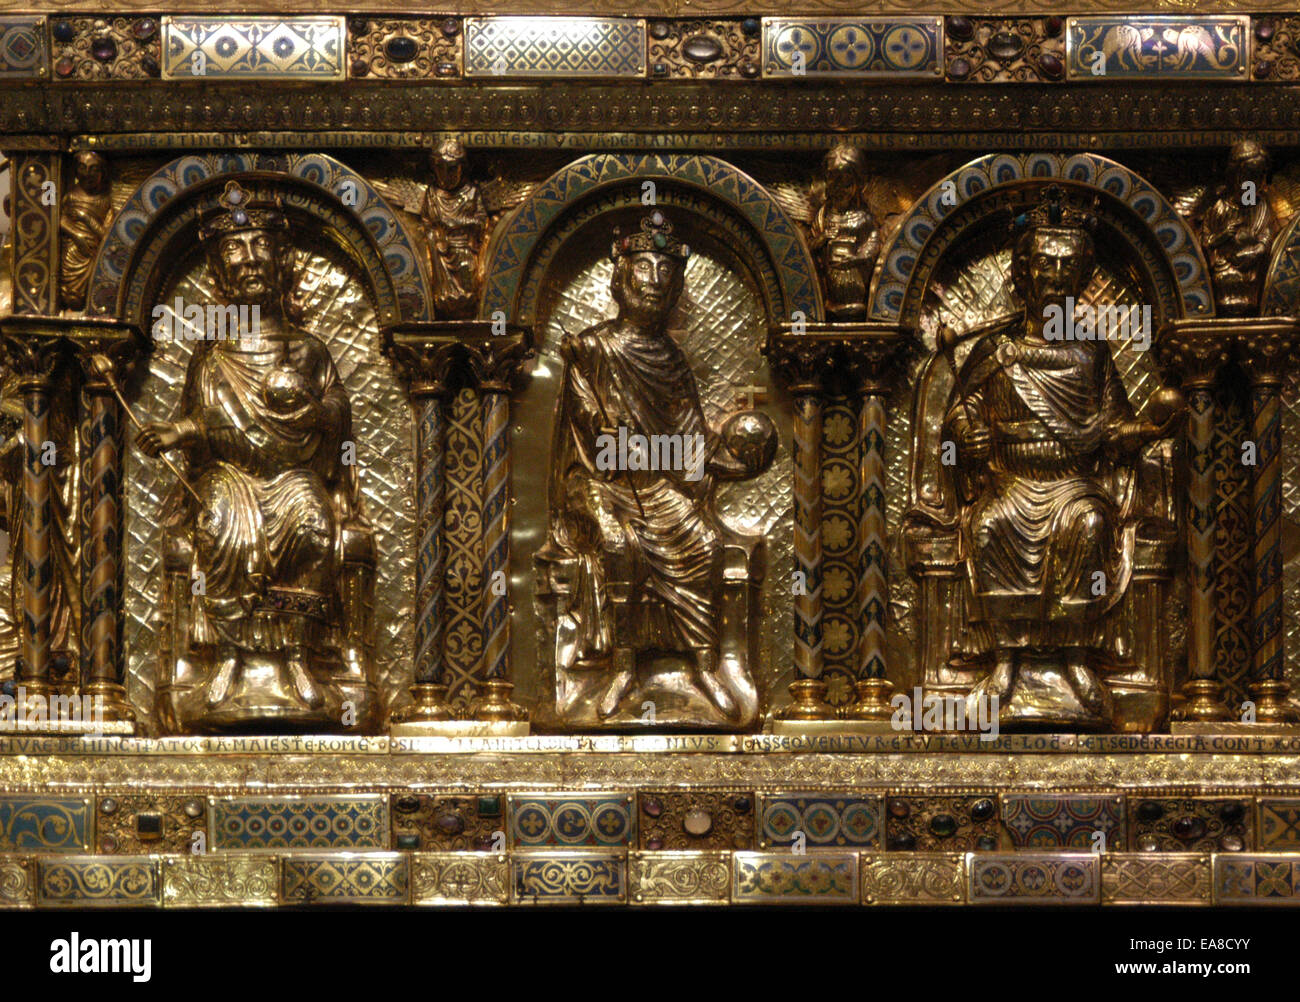 The Karlsschrein of the Shrine of Charlemagne (1215) in Aachen Cathedral, North Rhine-Westphalia, Germany. Stock Photo